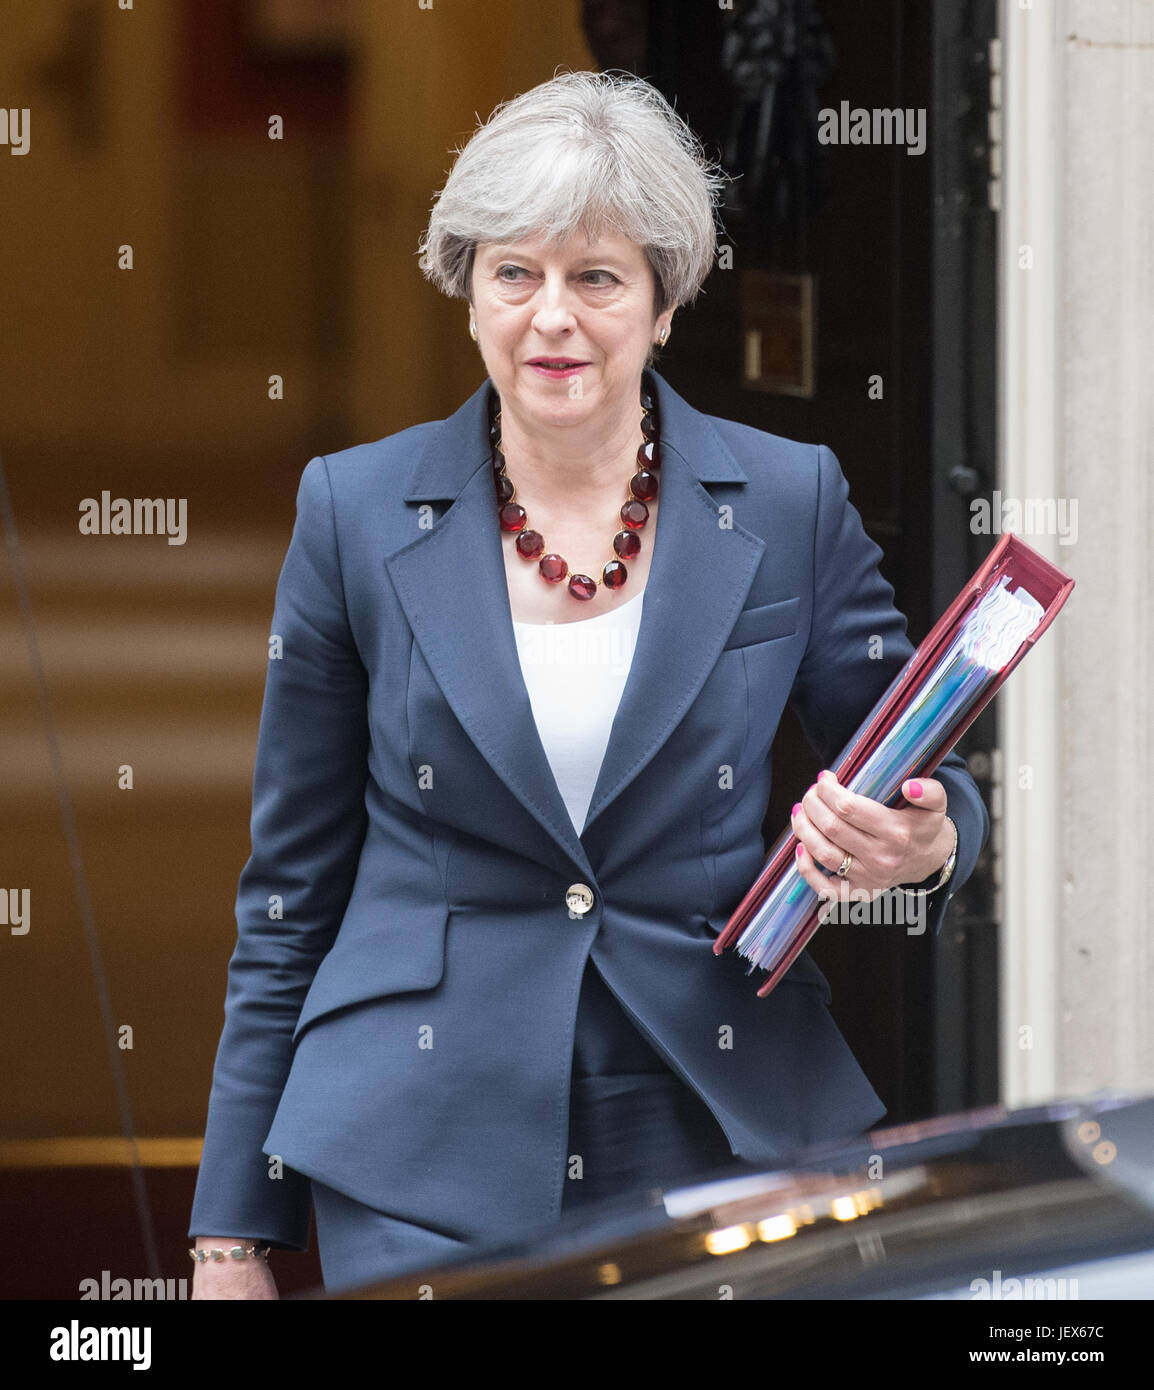 London, United Kingdom. 28 June 2017. Prime Minister Theresa May leaves 10  Downing Street bound for the House of Commons for Prime Ministers  Questions. Credit: Peter Manning / Alamy Live News Stock Photo - Alamy